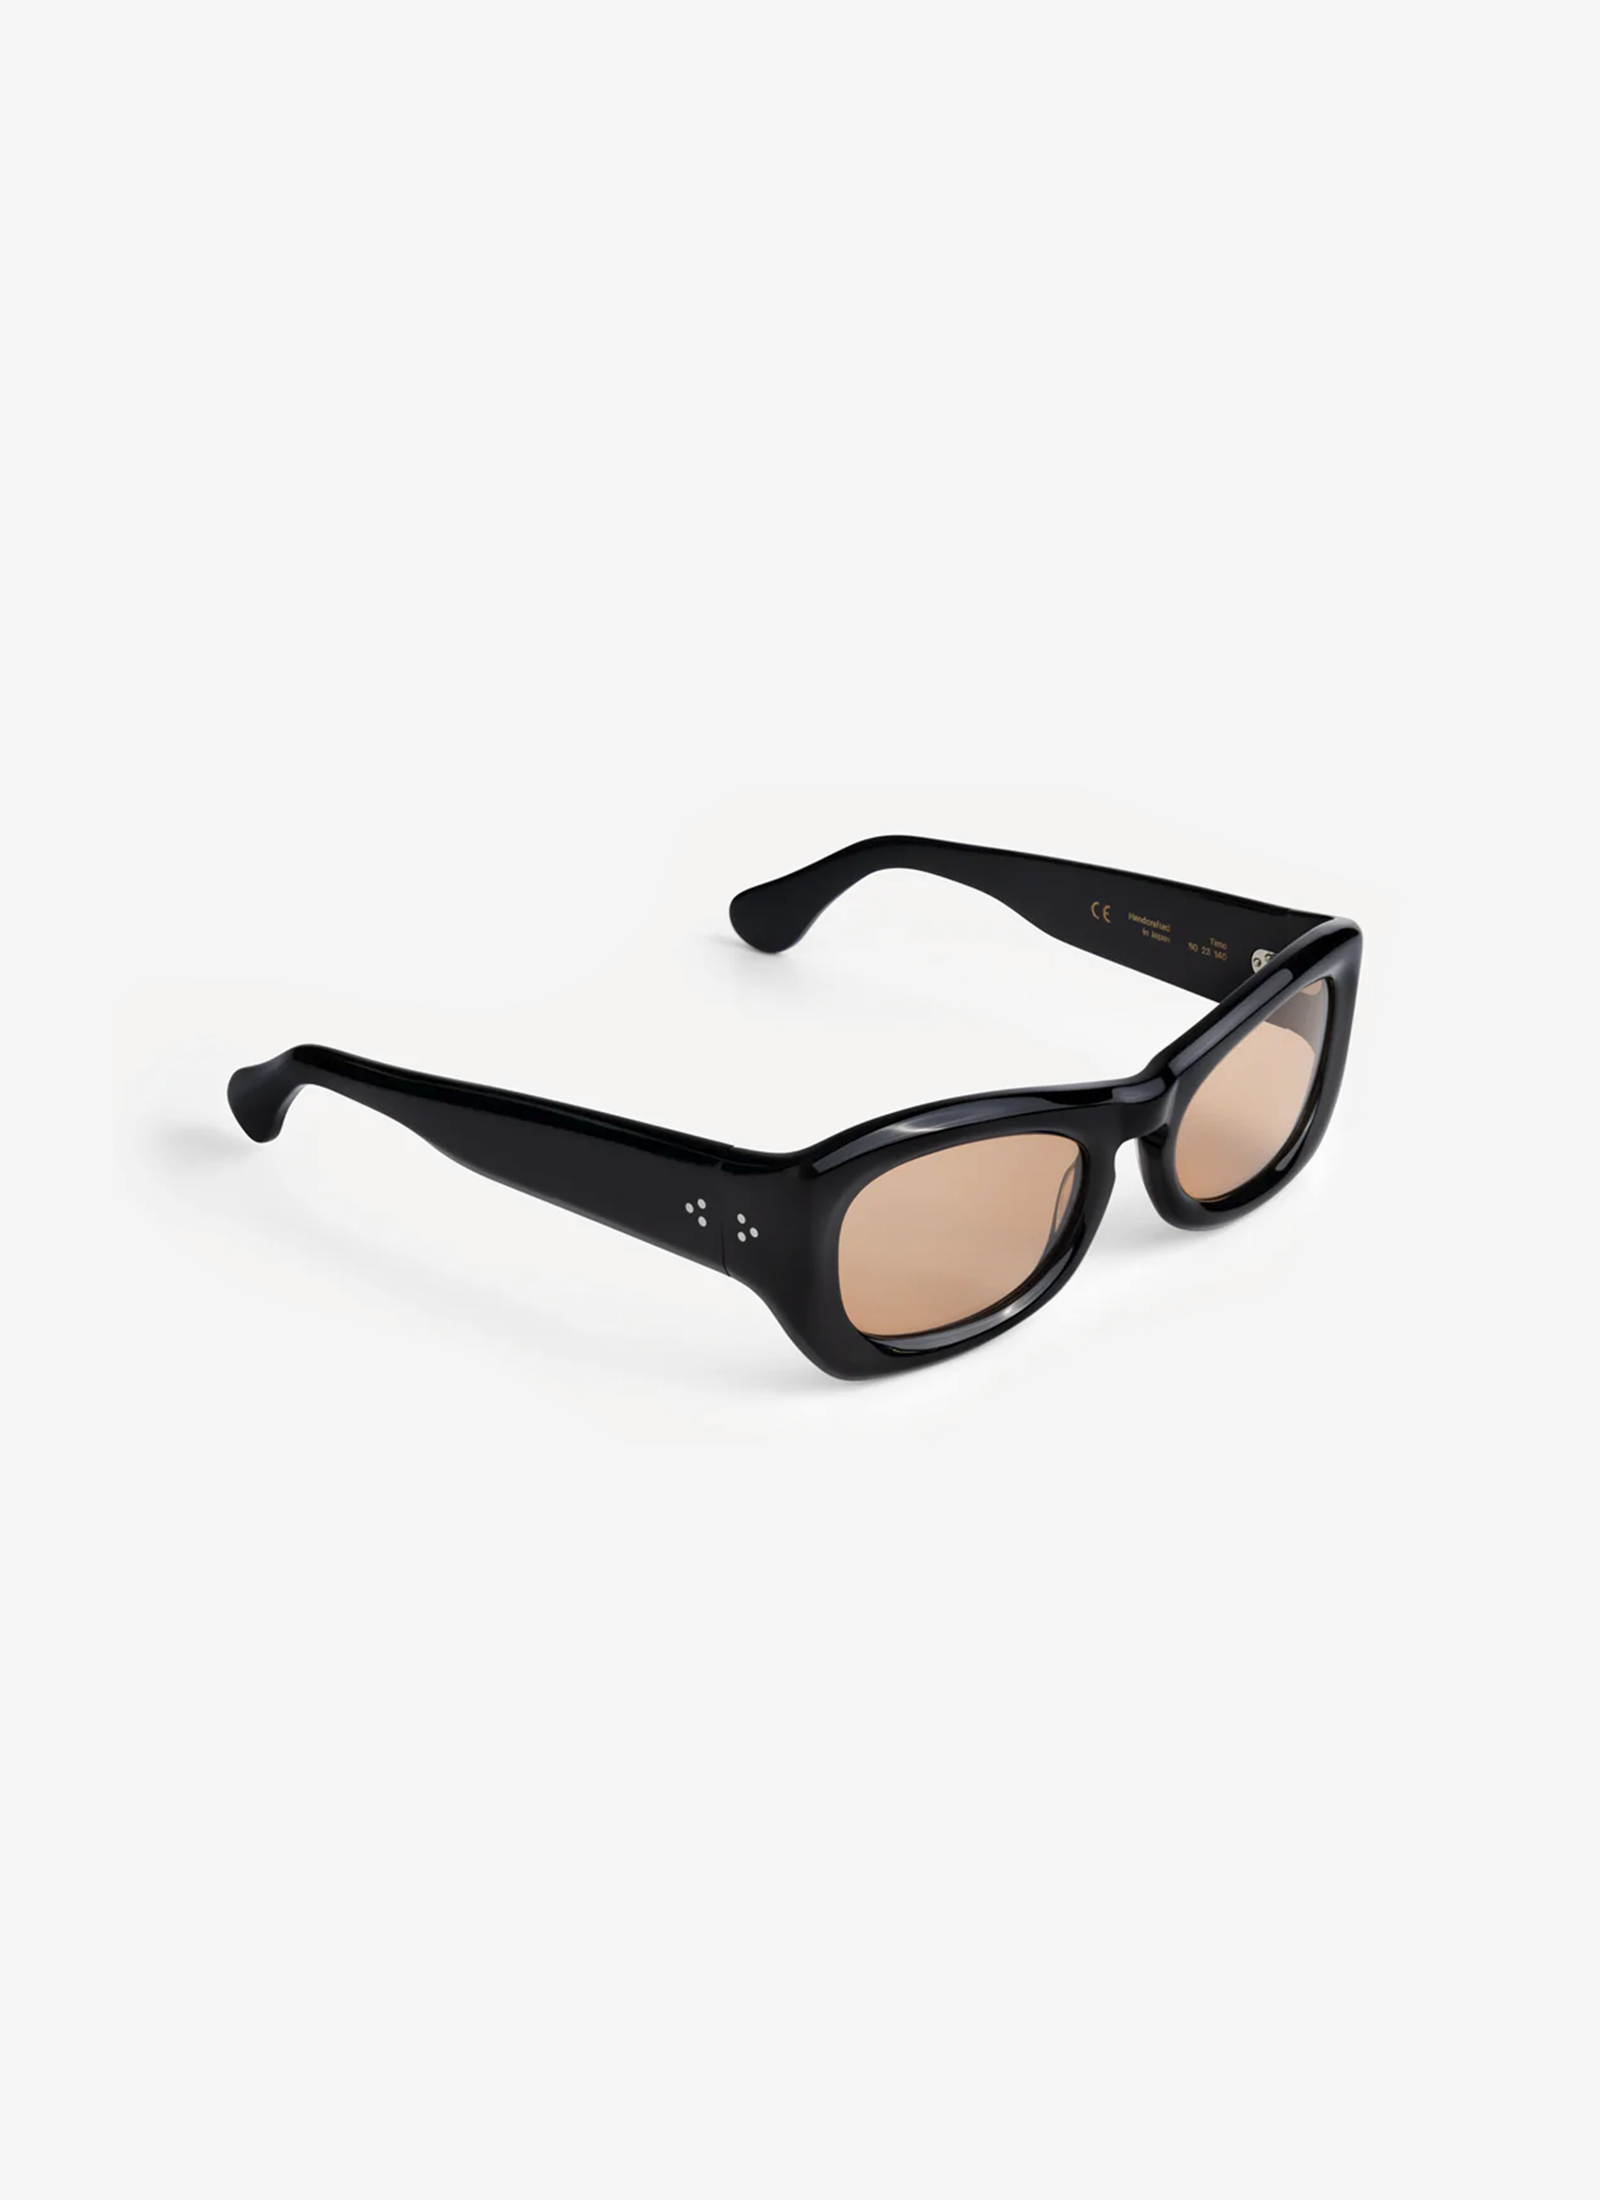 Temo - Black With Amber Lens